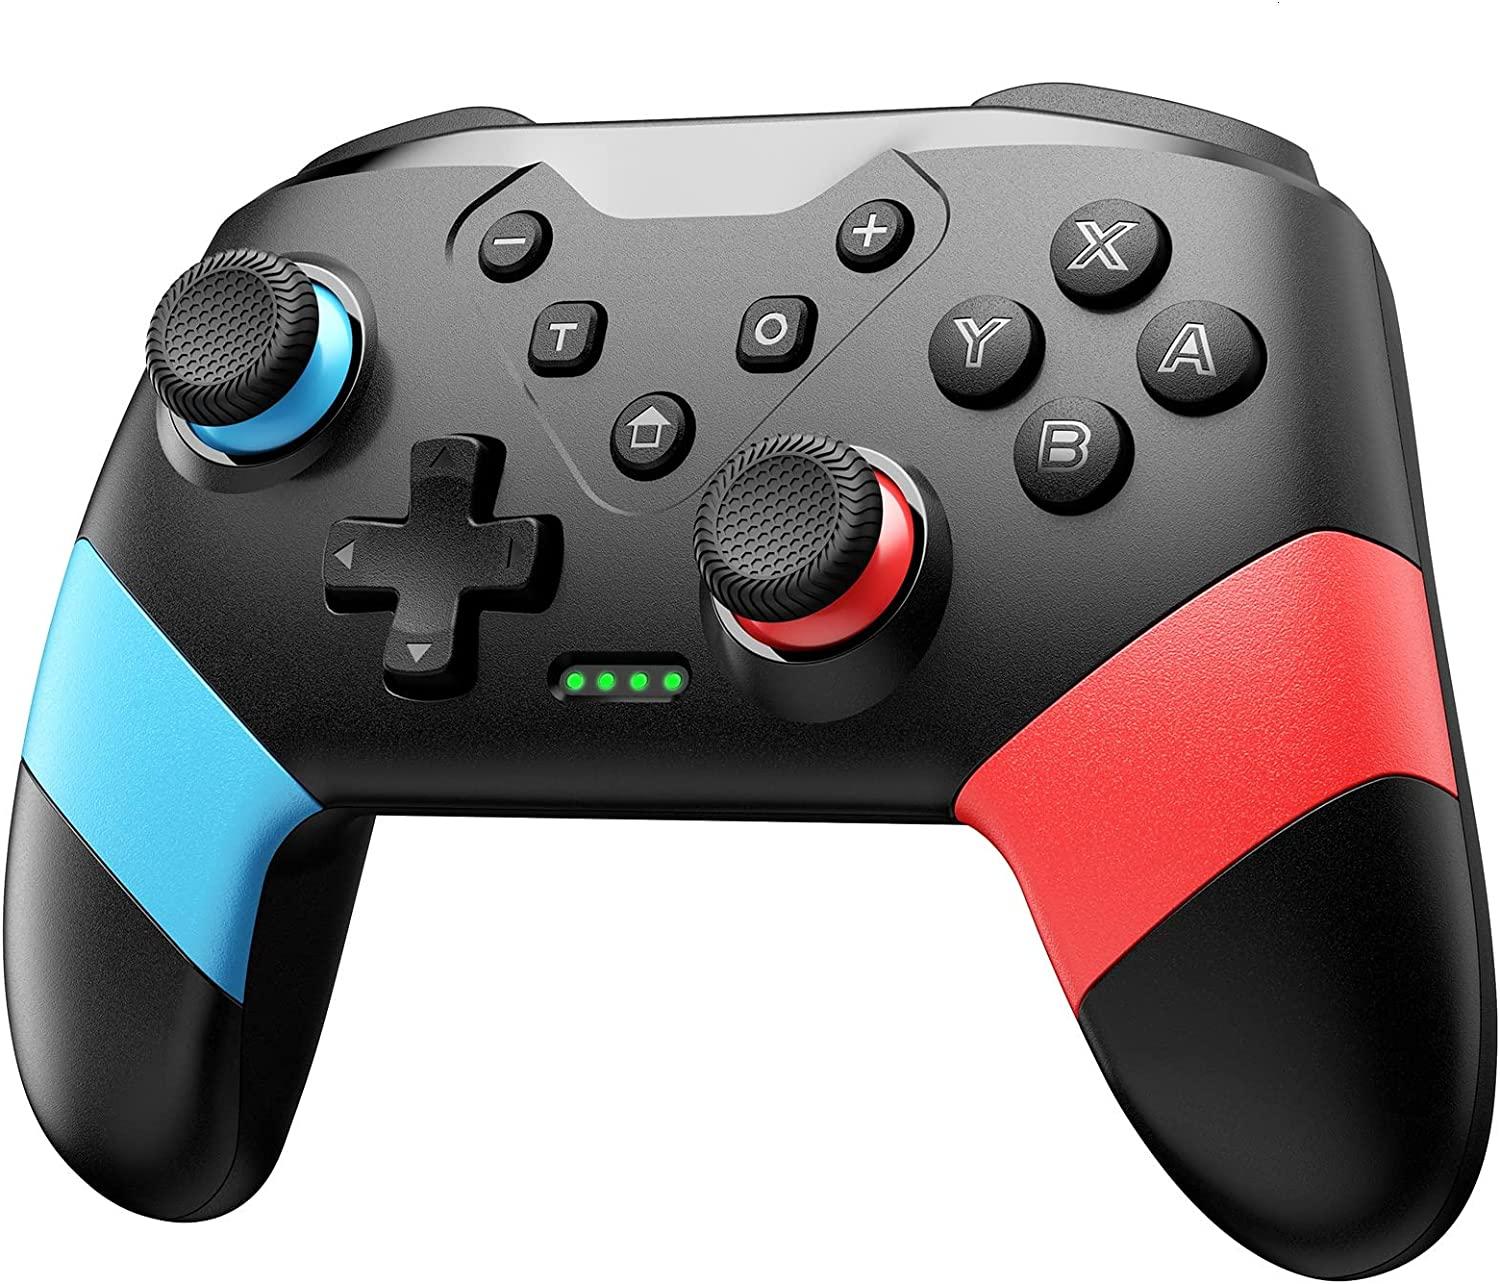 Voyee Pro Switch Controller for $12.79